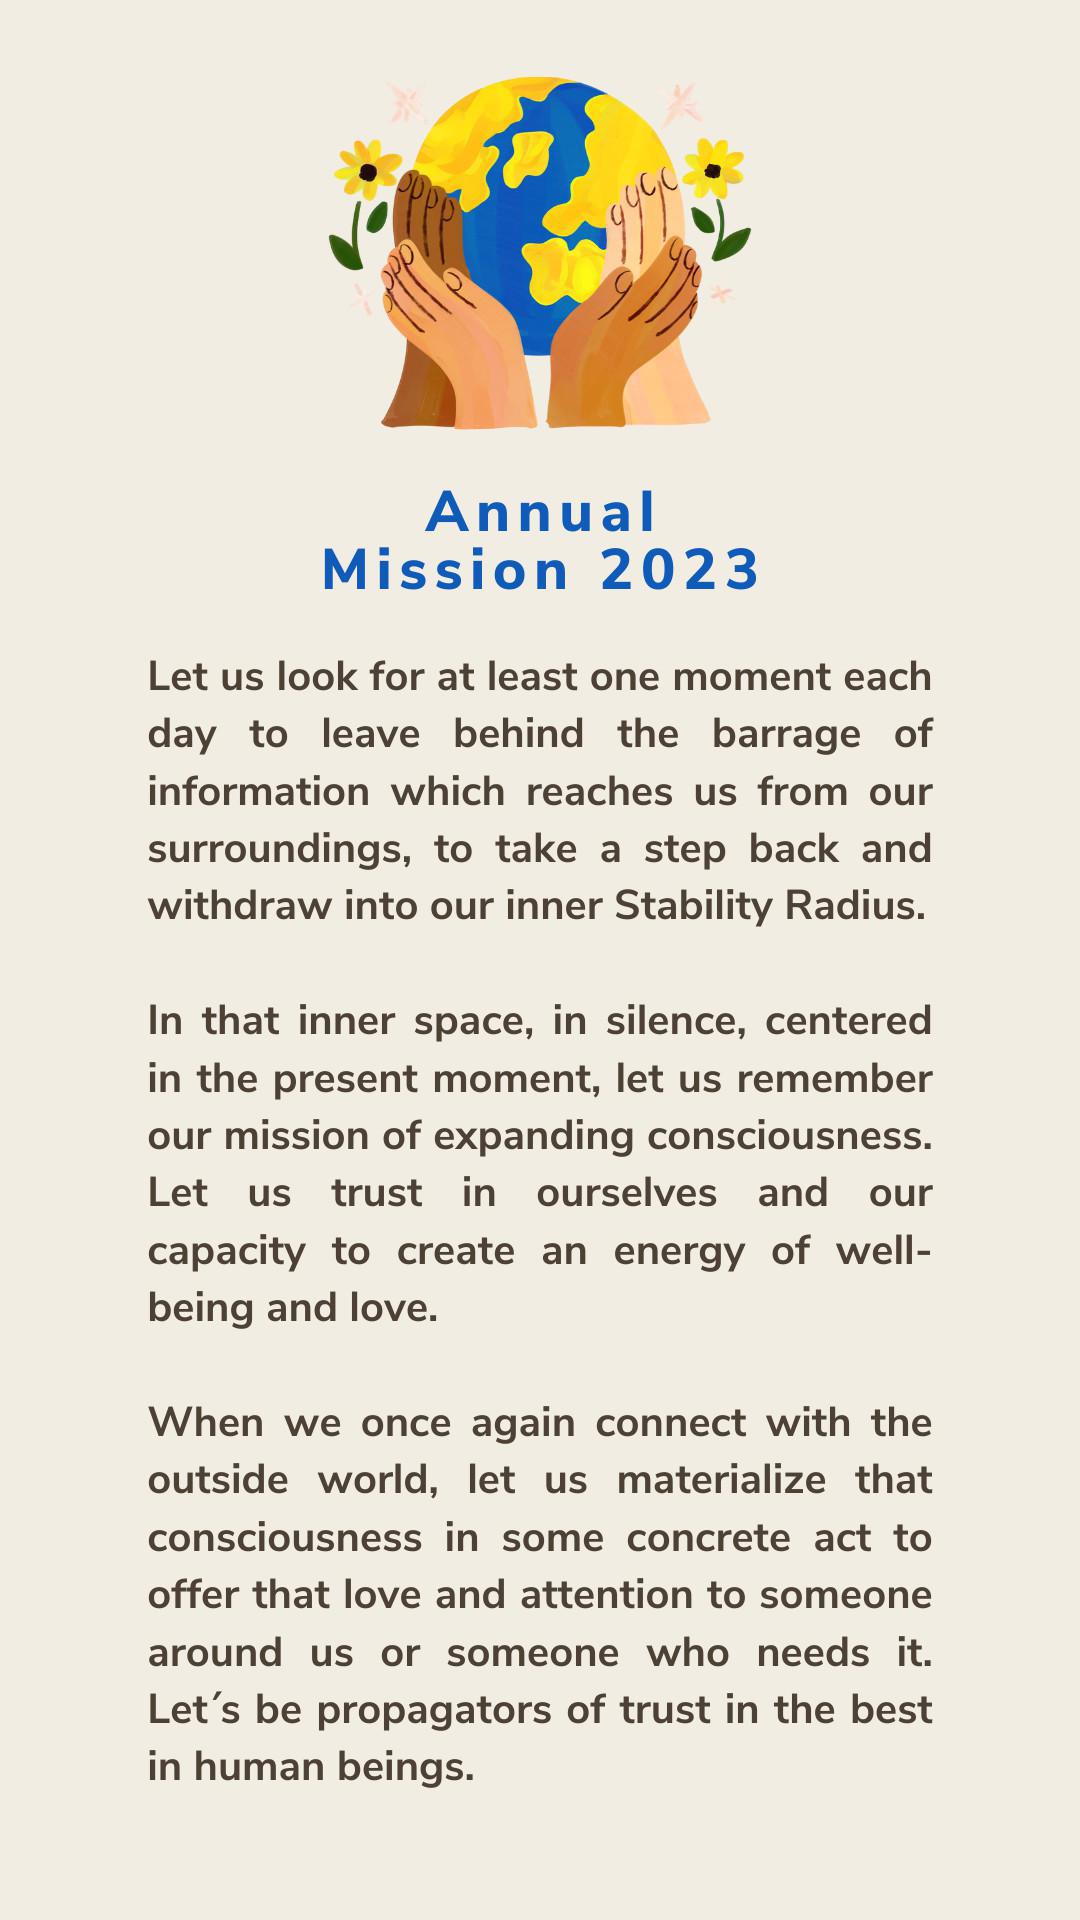 Annual Mission 2023